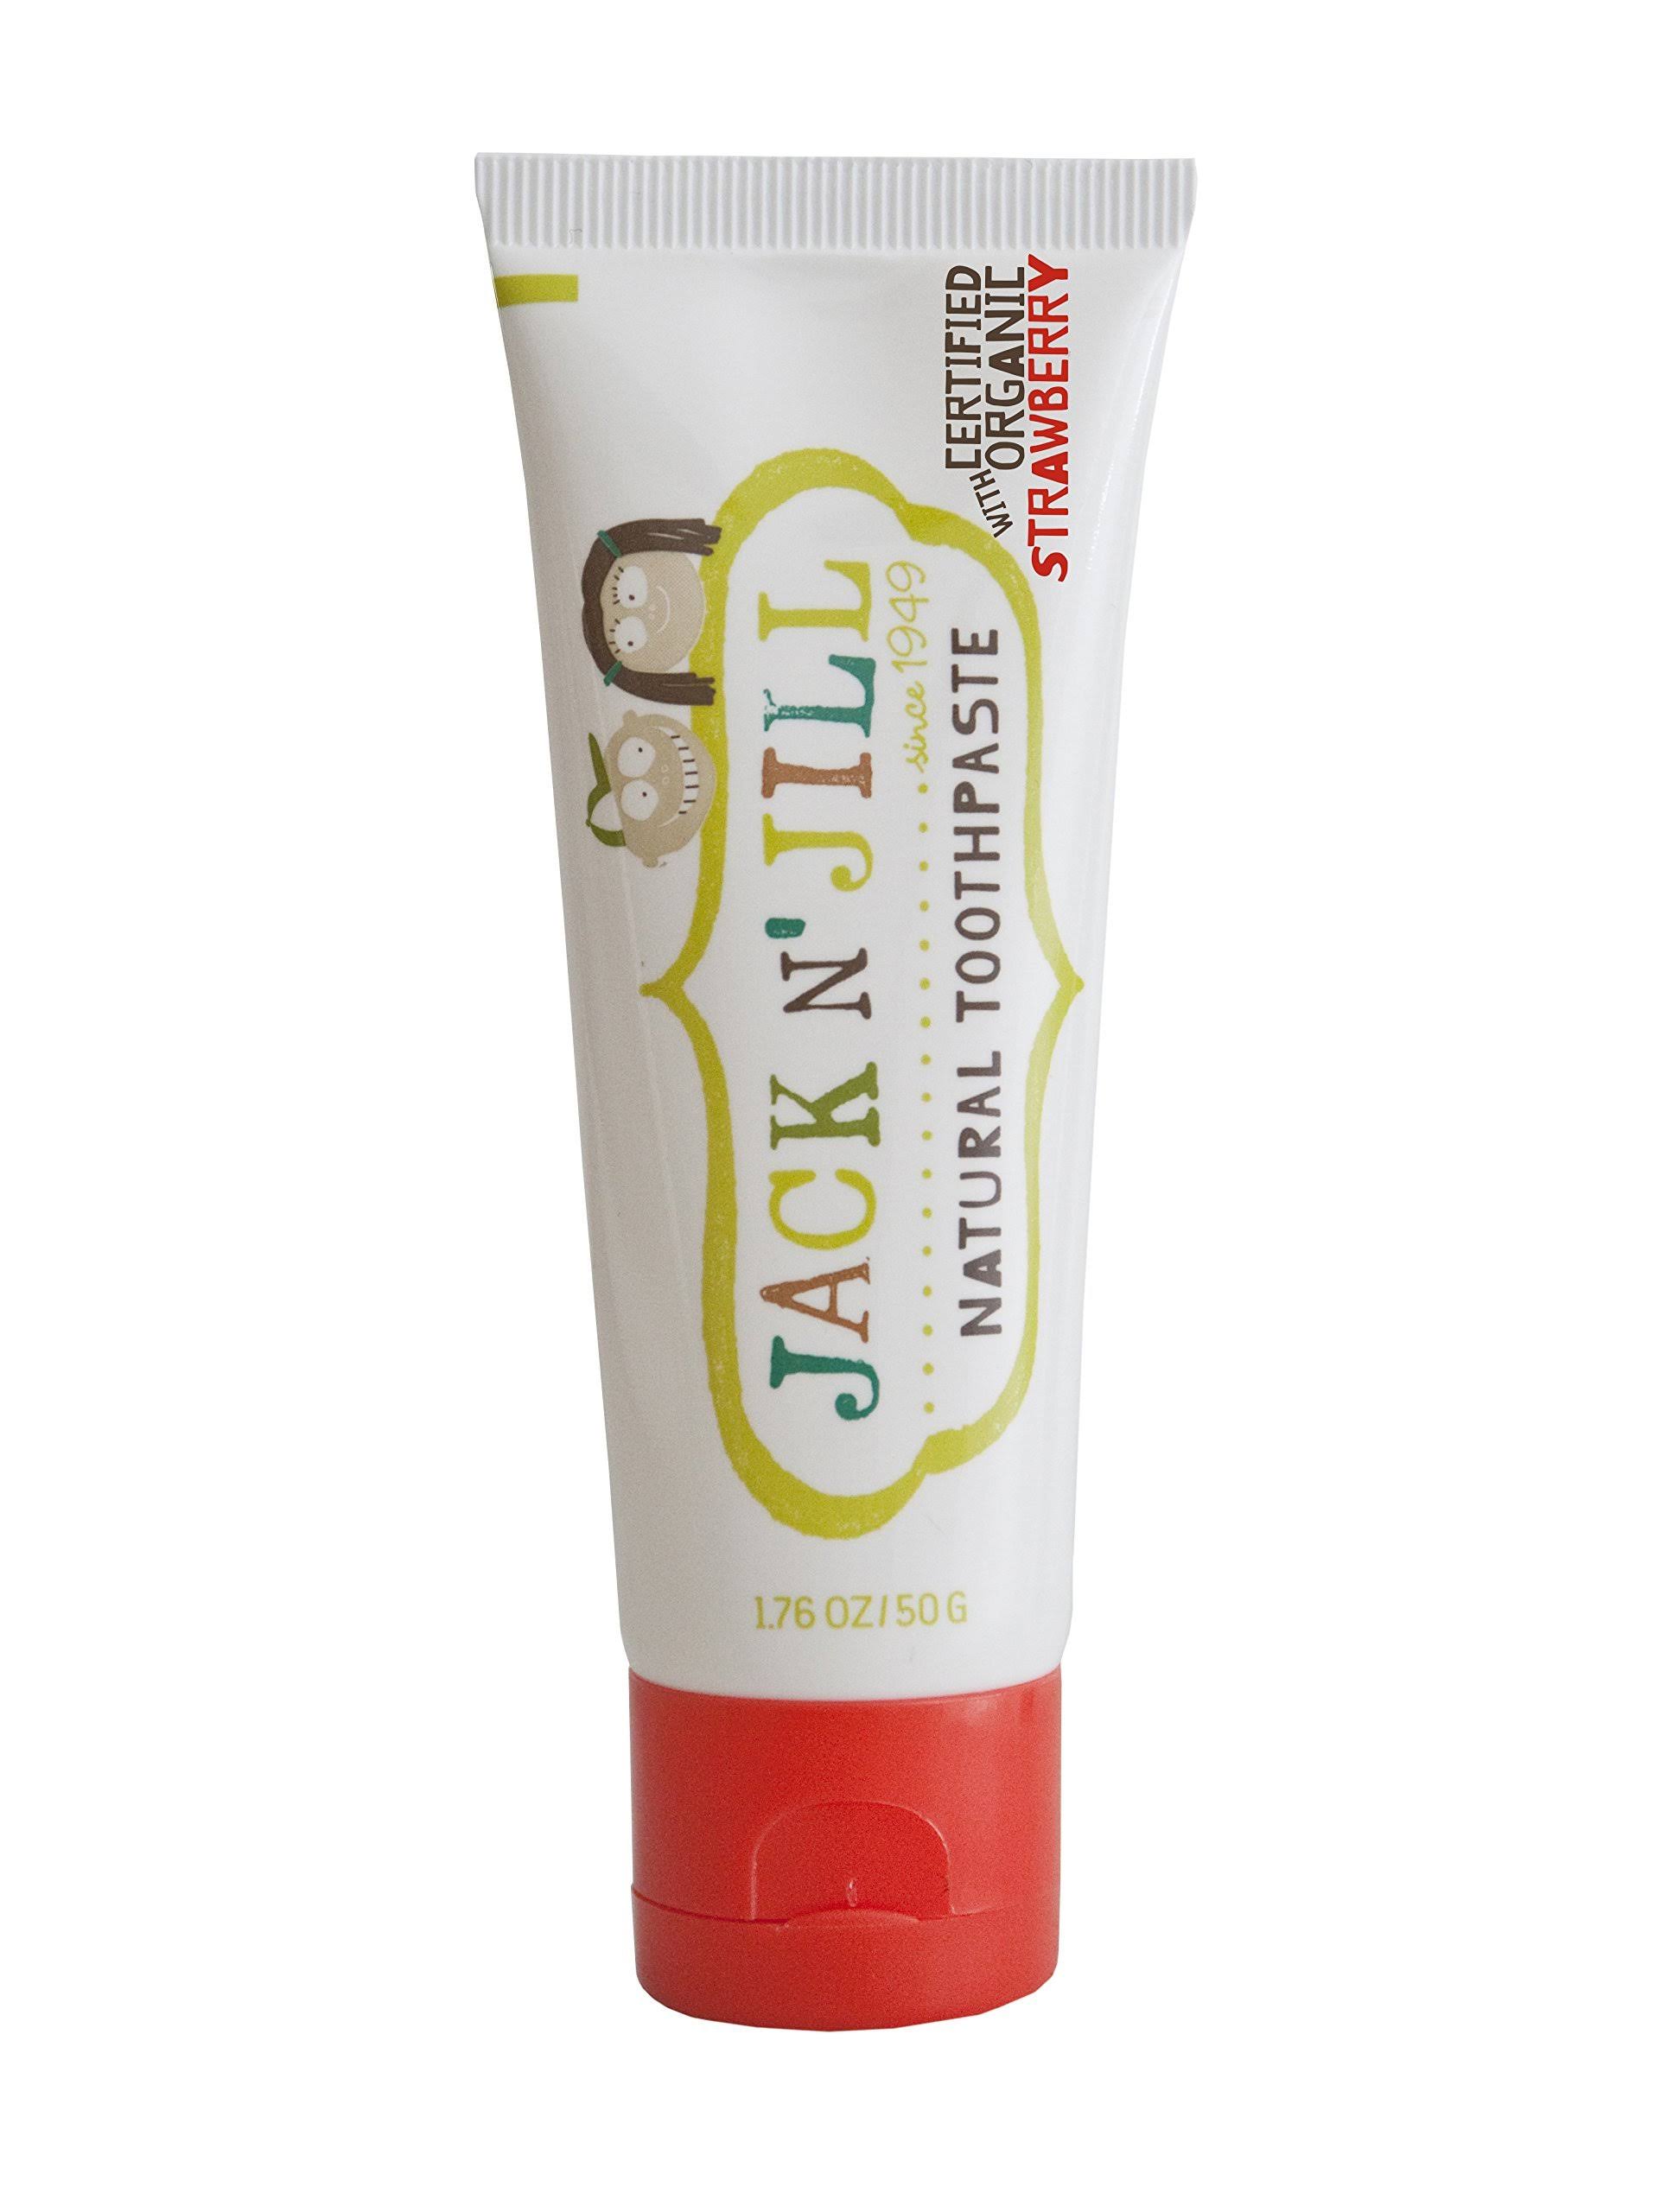 Jack N Jill Certified Organic Strawberry Natural Toothpaste - 50g